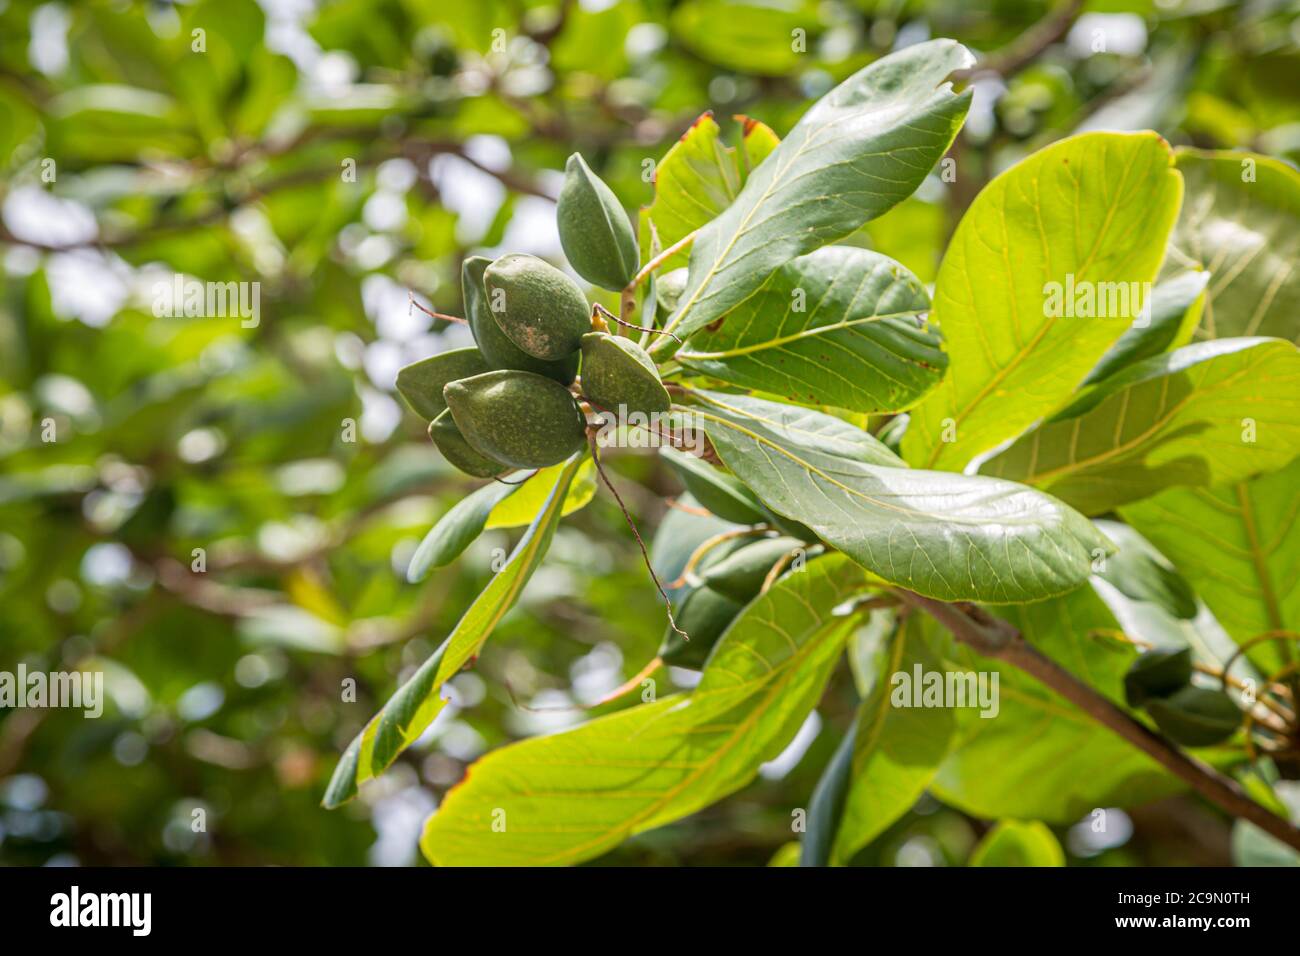 A Tropical Almond Tree on the Island of Barbados, with a Shallow Depth ...